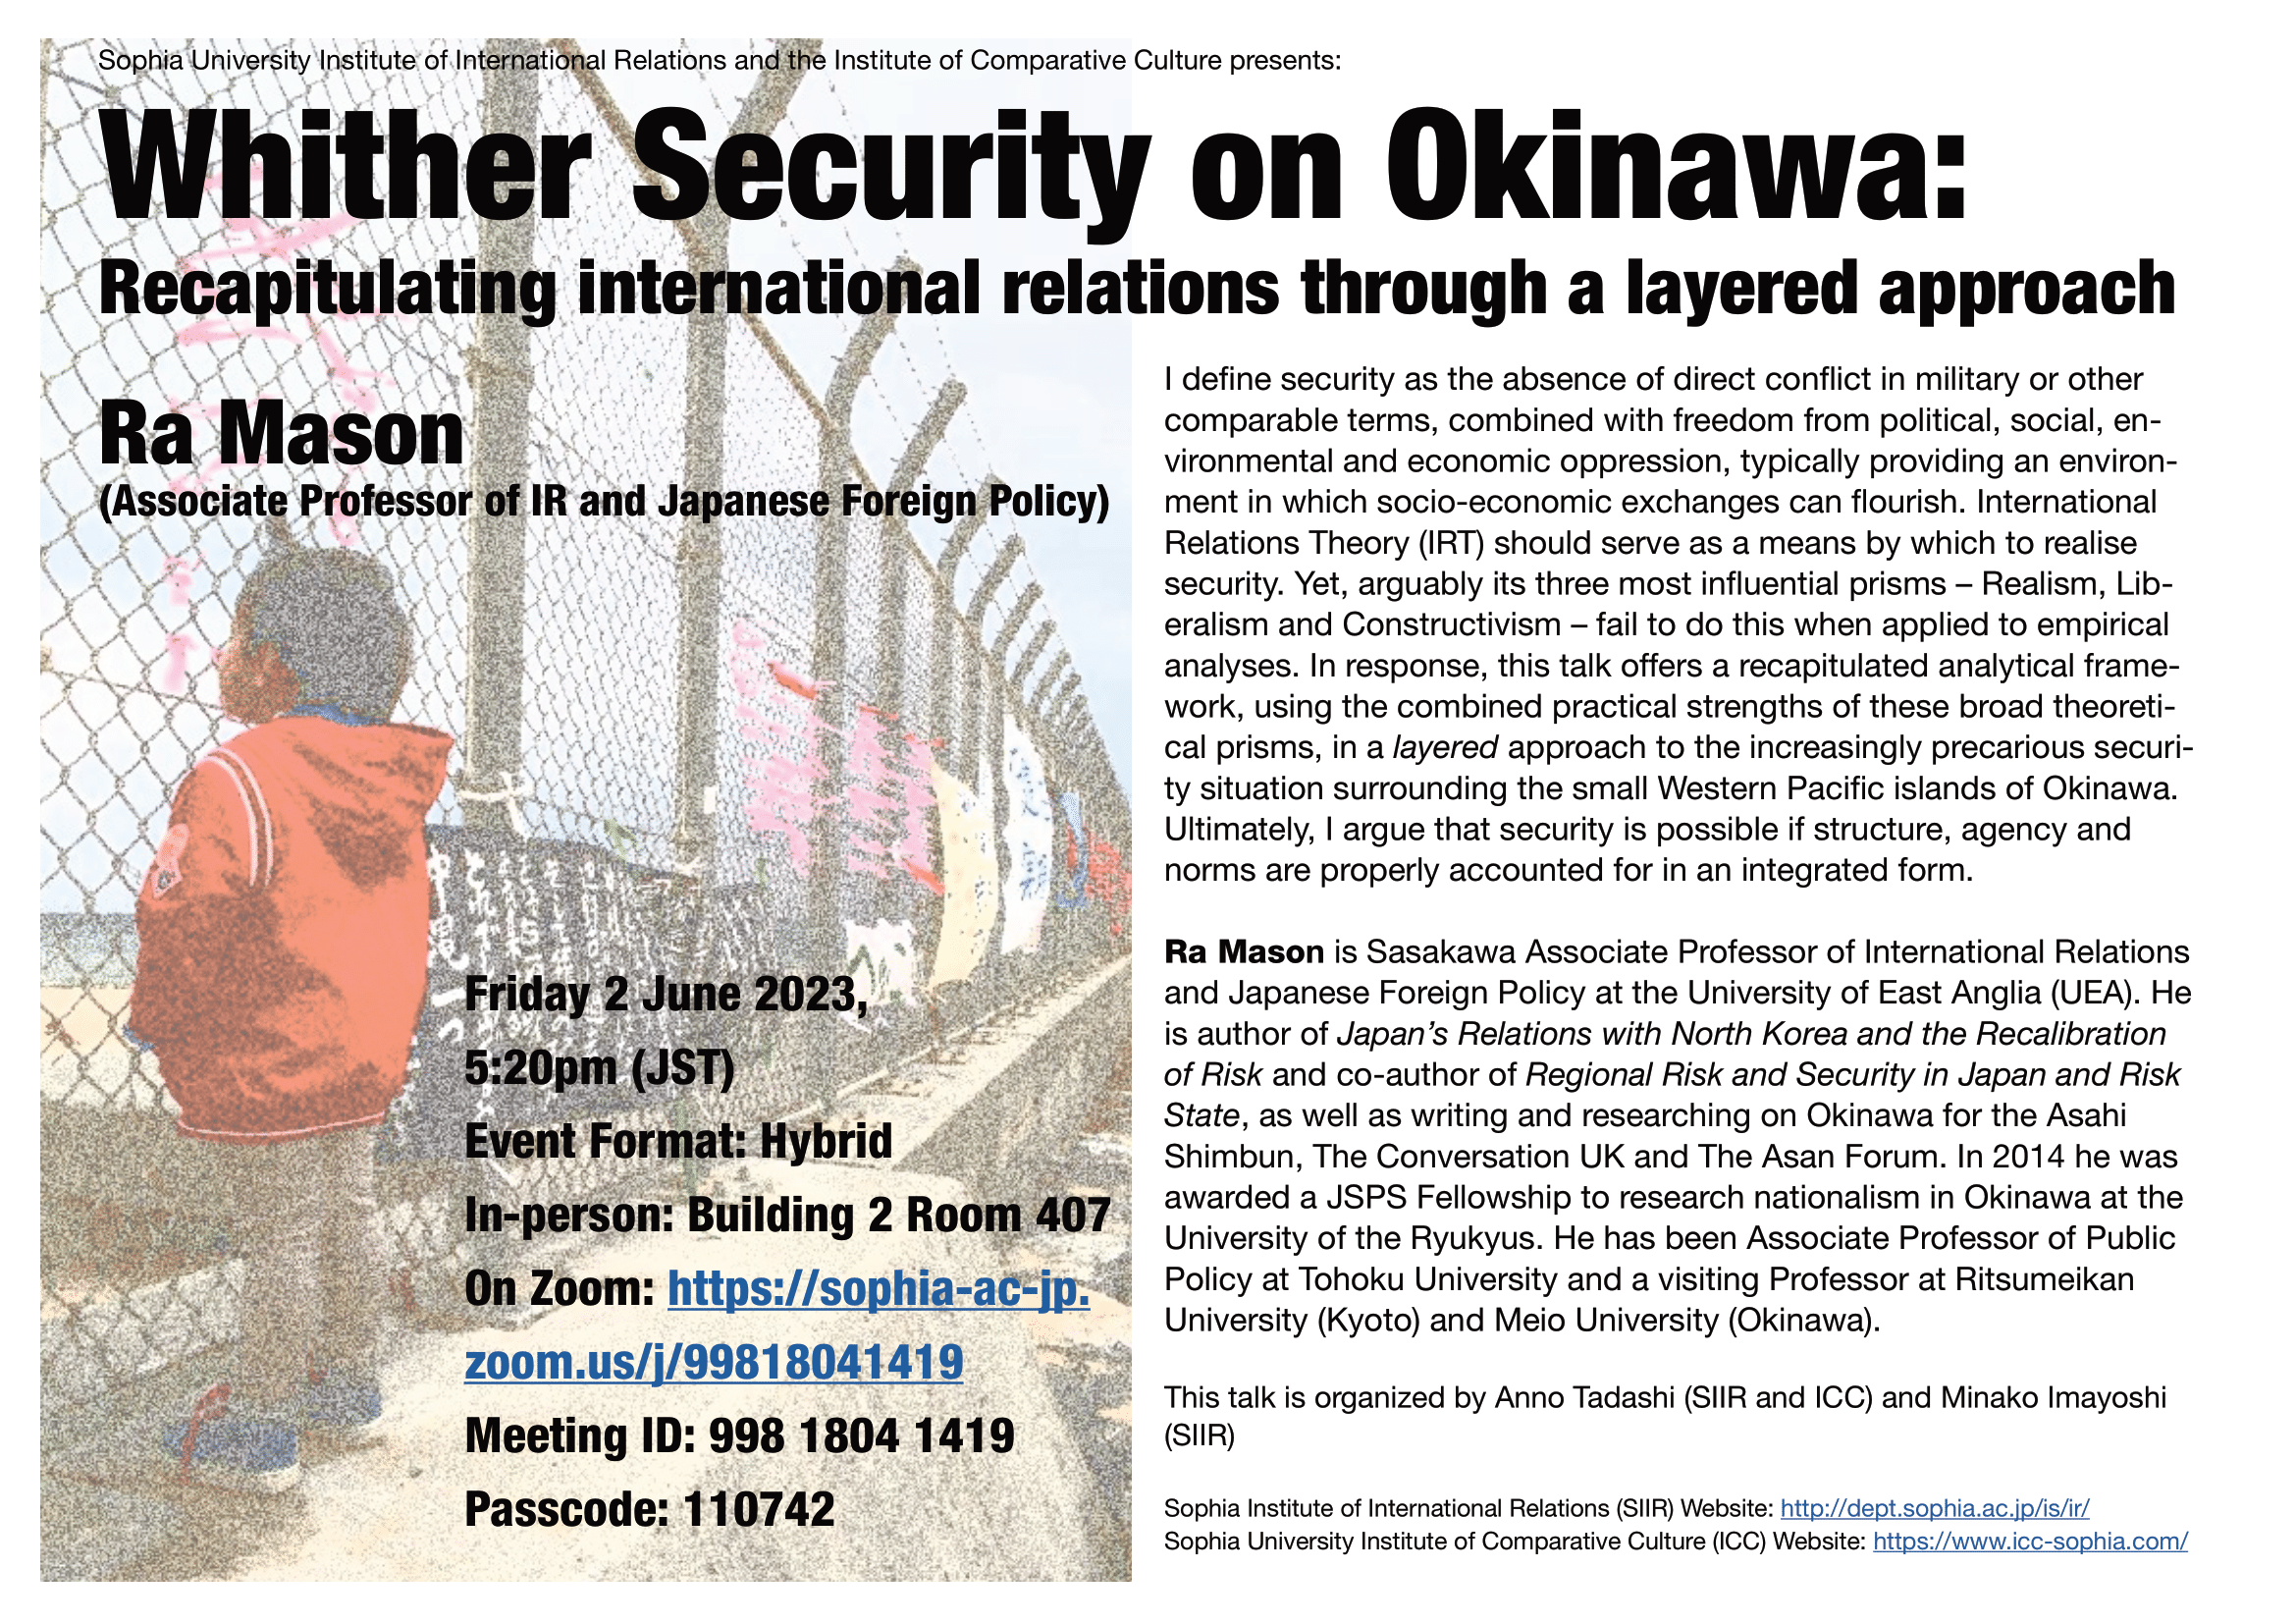 Whither Security on Okinawa: Recapitulating international relations through a layered approach